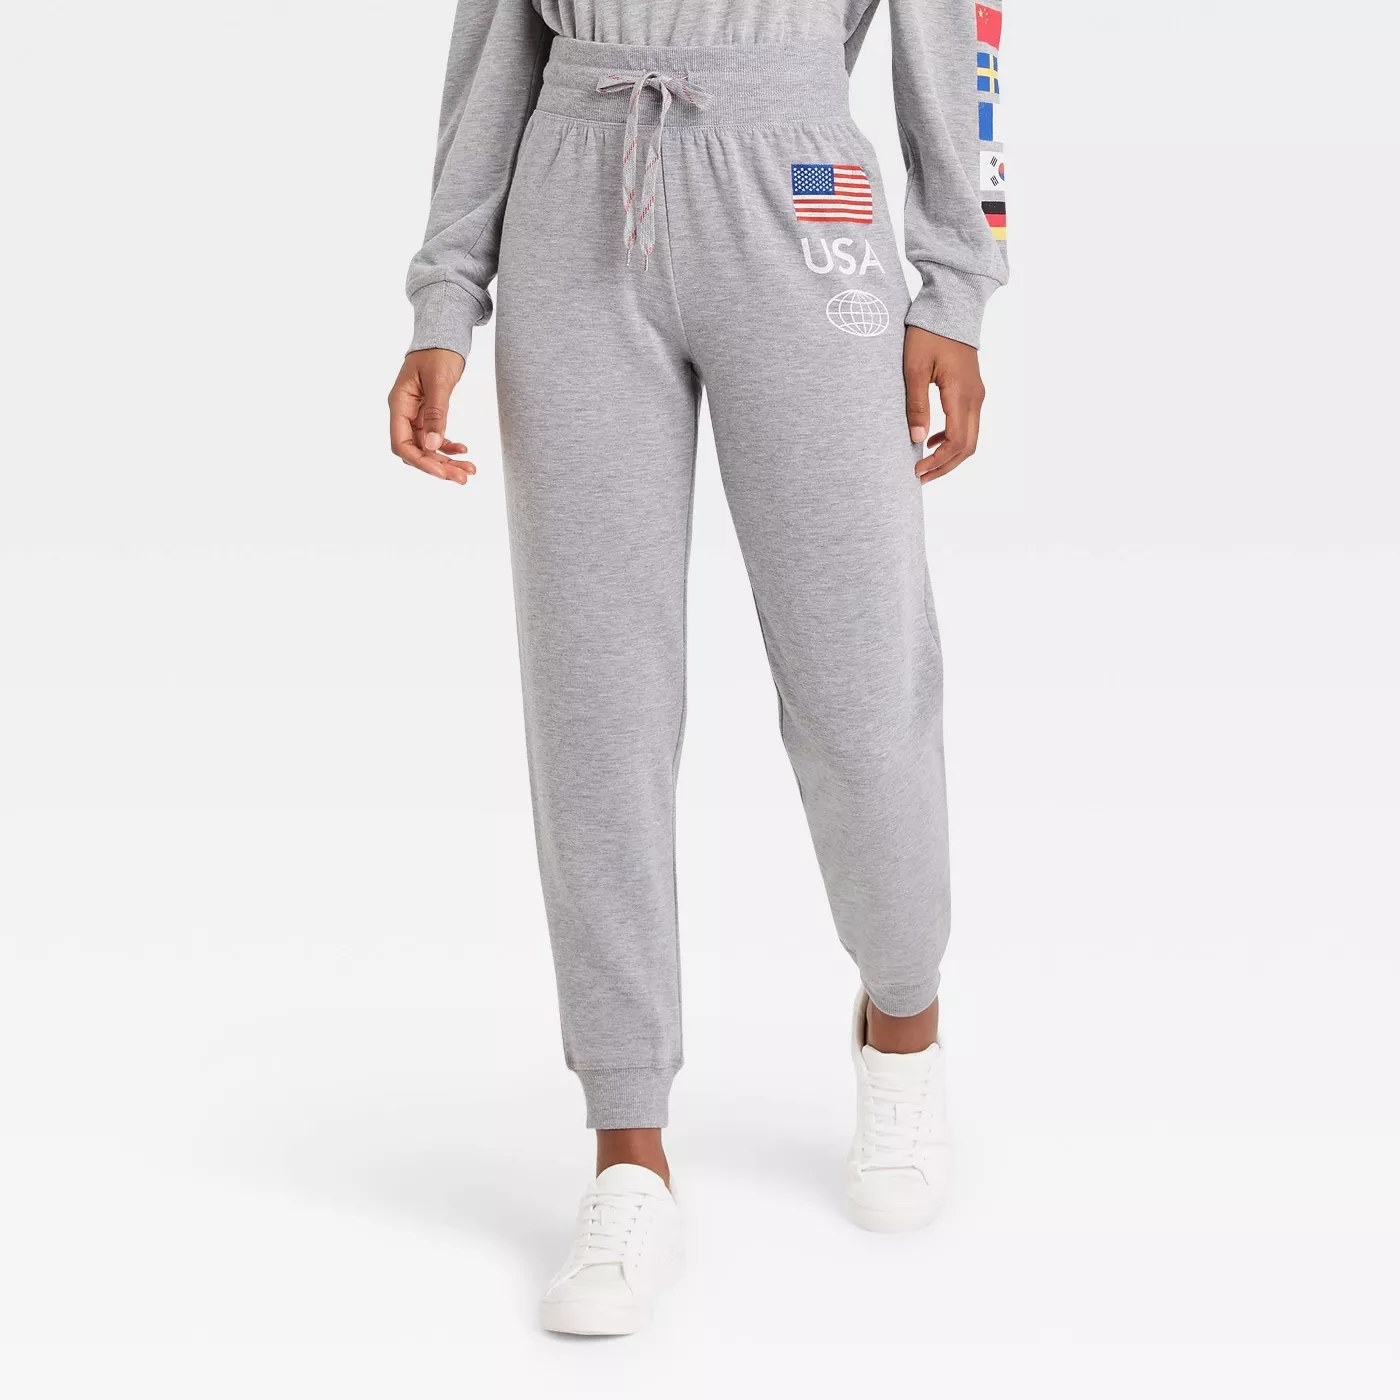 The gray joggers with the USA graphic